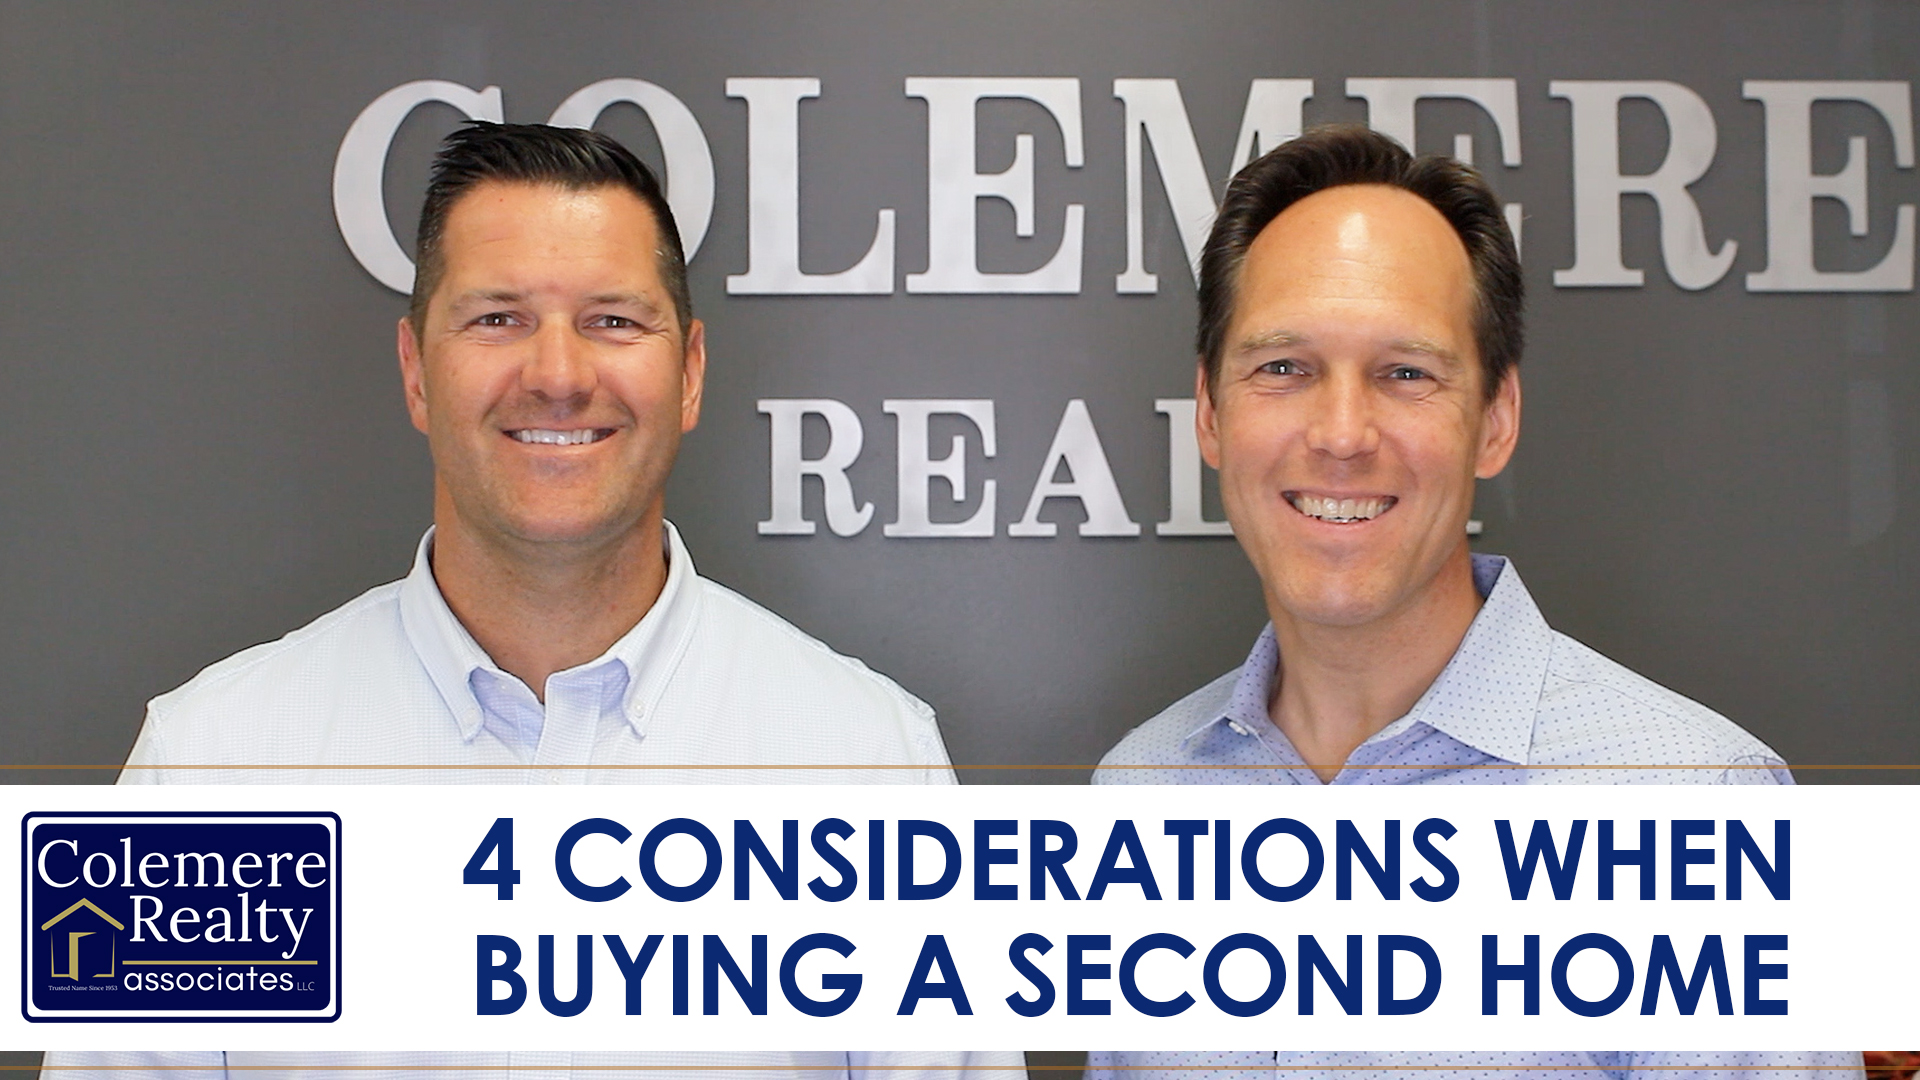 The 4 Things You Should Consider Before Buying a Second Home